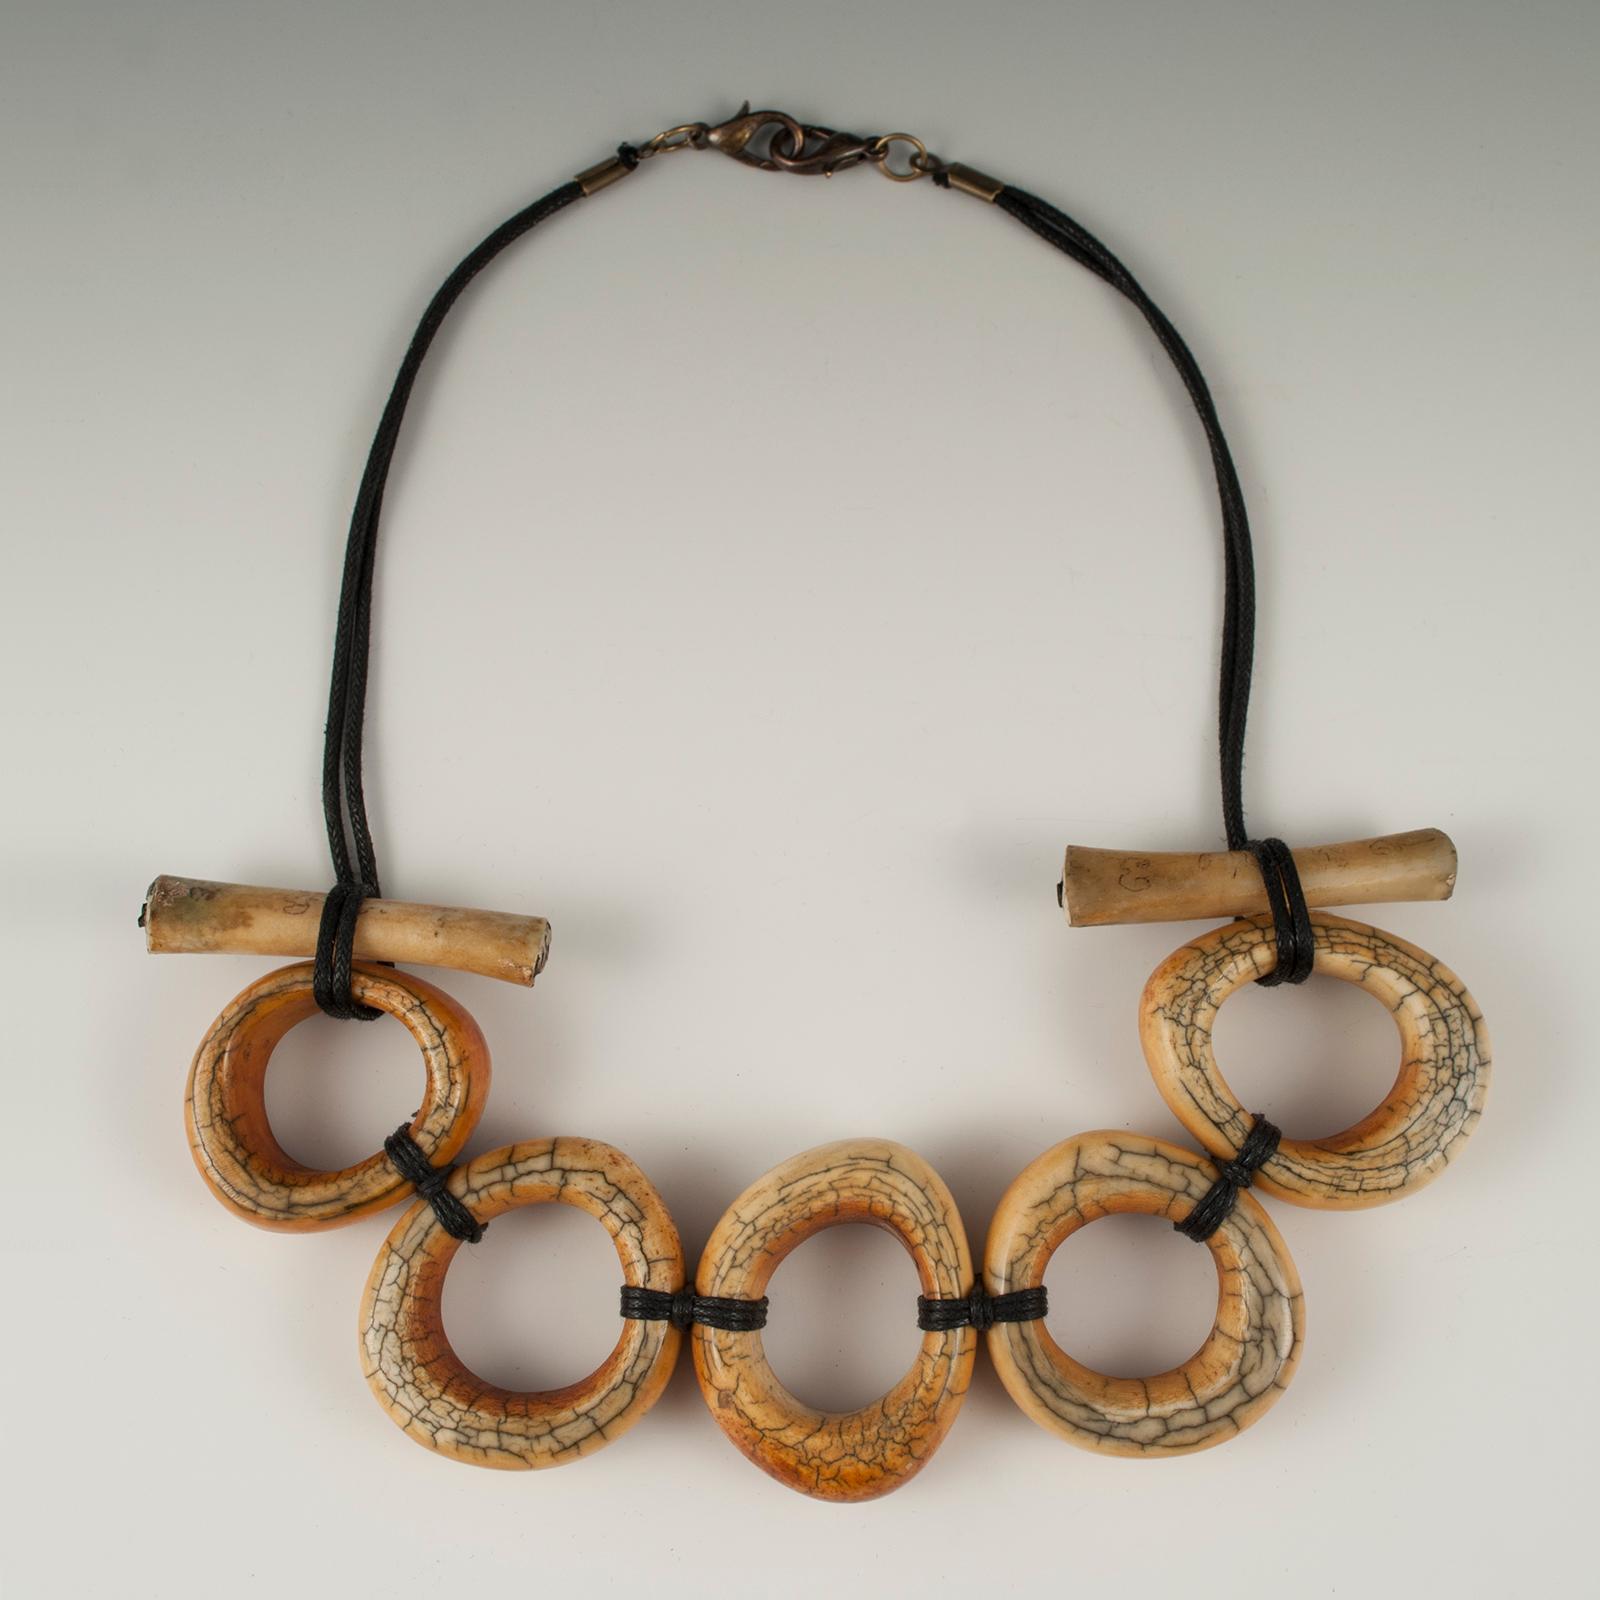 Offered by Zena Kruzick
Large antique yak bone tribal necklace by Claire Ginioux, Paris, France

Old yak bone rings, which were worn in their hair by young Tibetan men, are combined with inscribed chicken bones used for divination in Thailand to